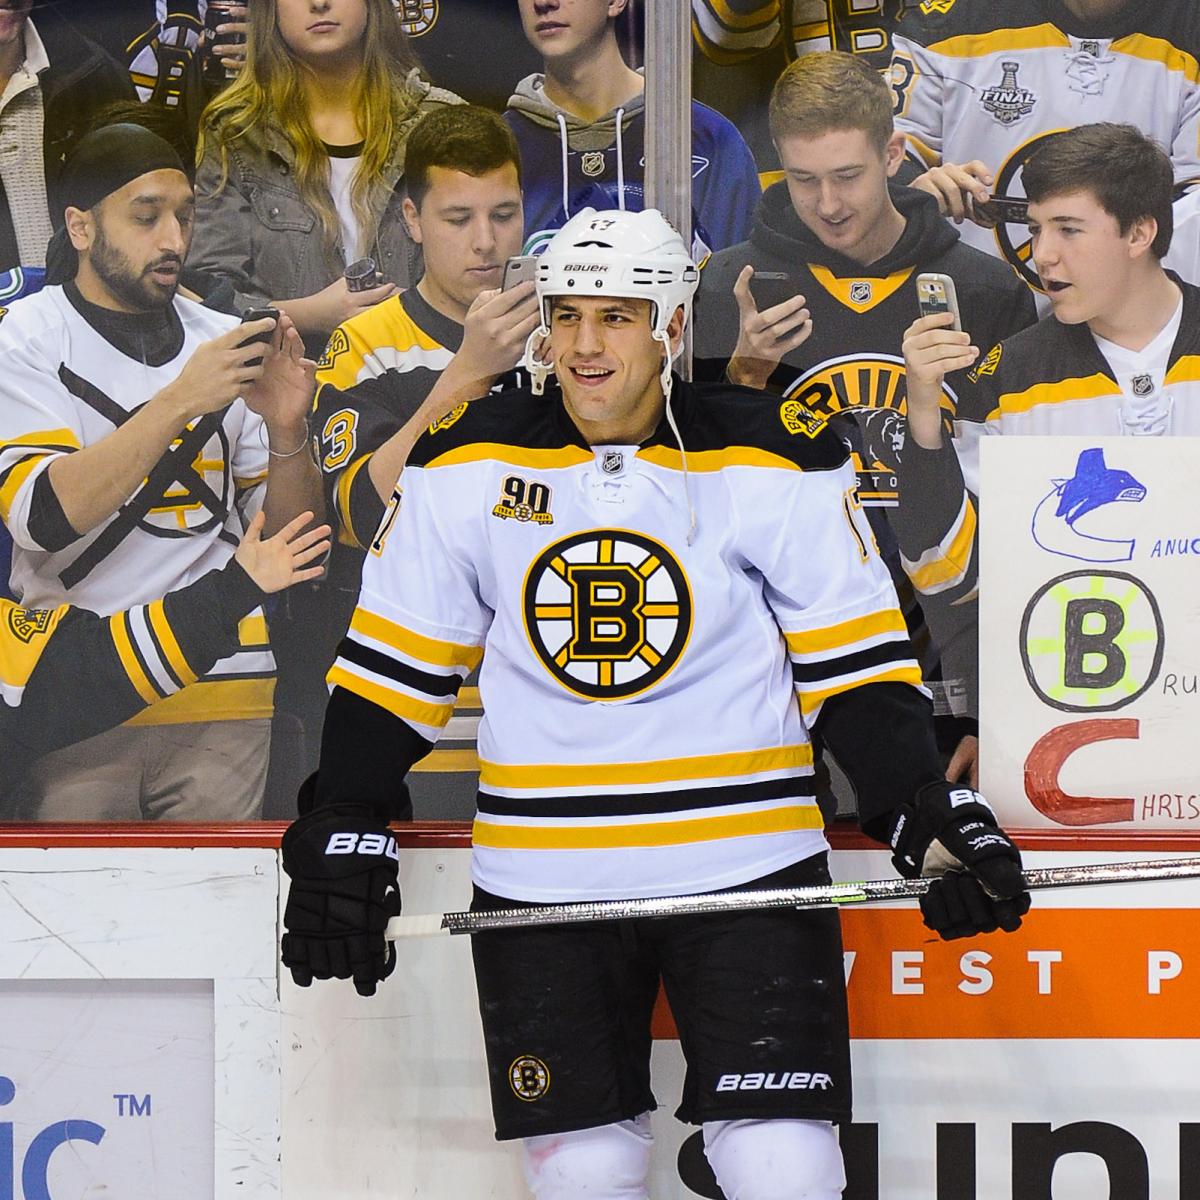 It's time for Boston Bruins fans to welcome home Milan Lucic